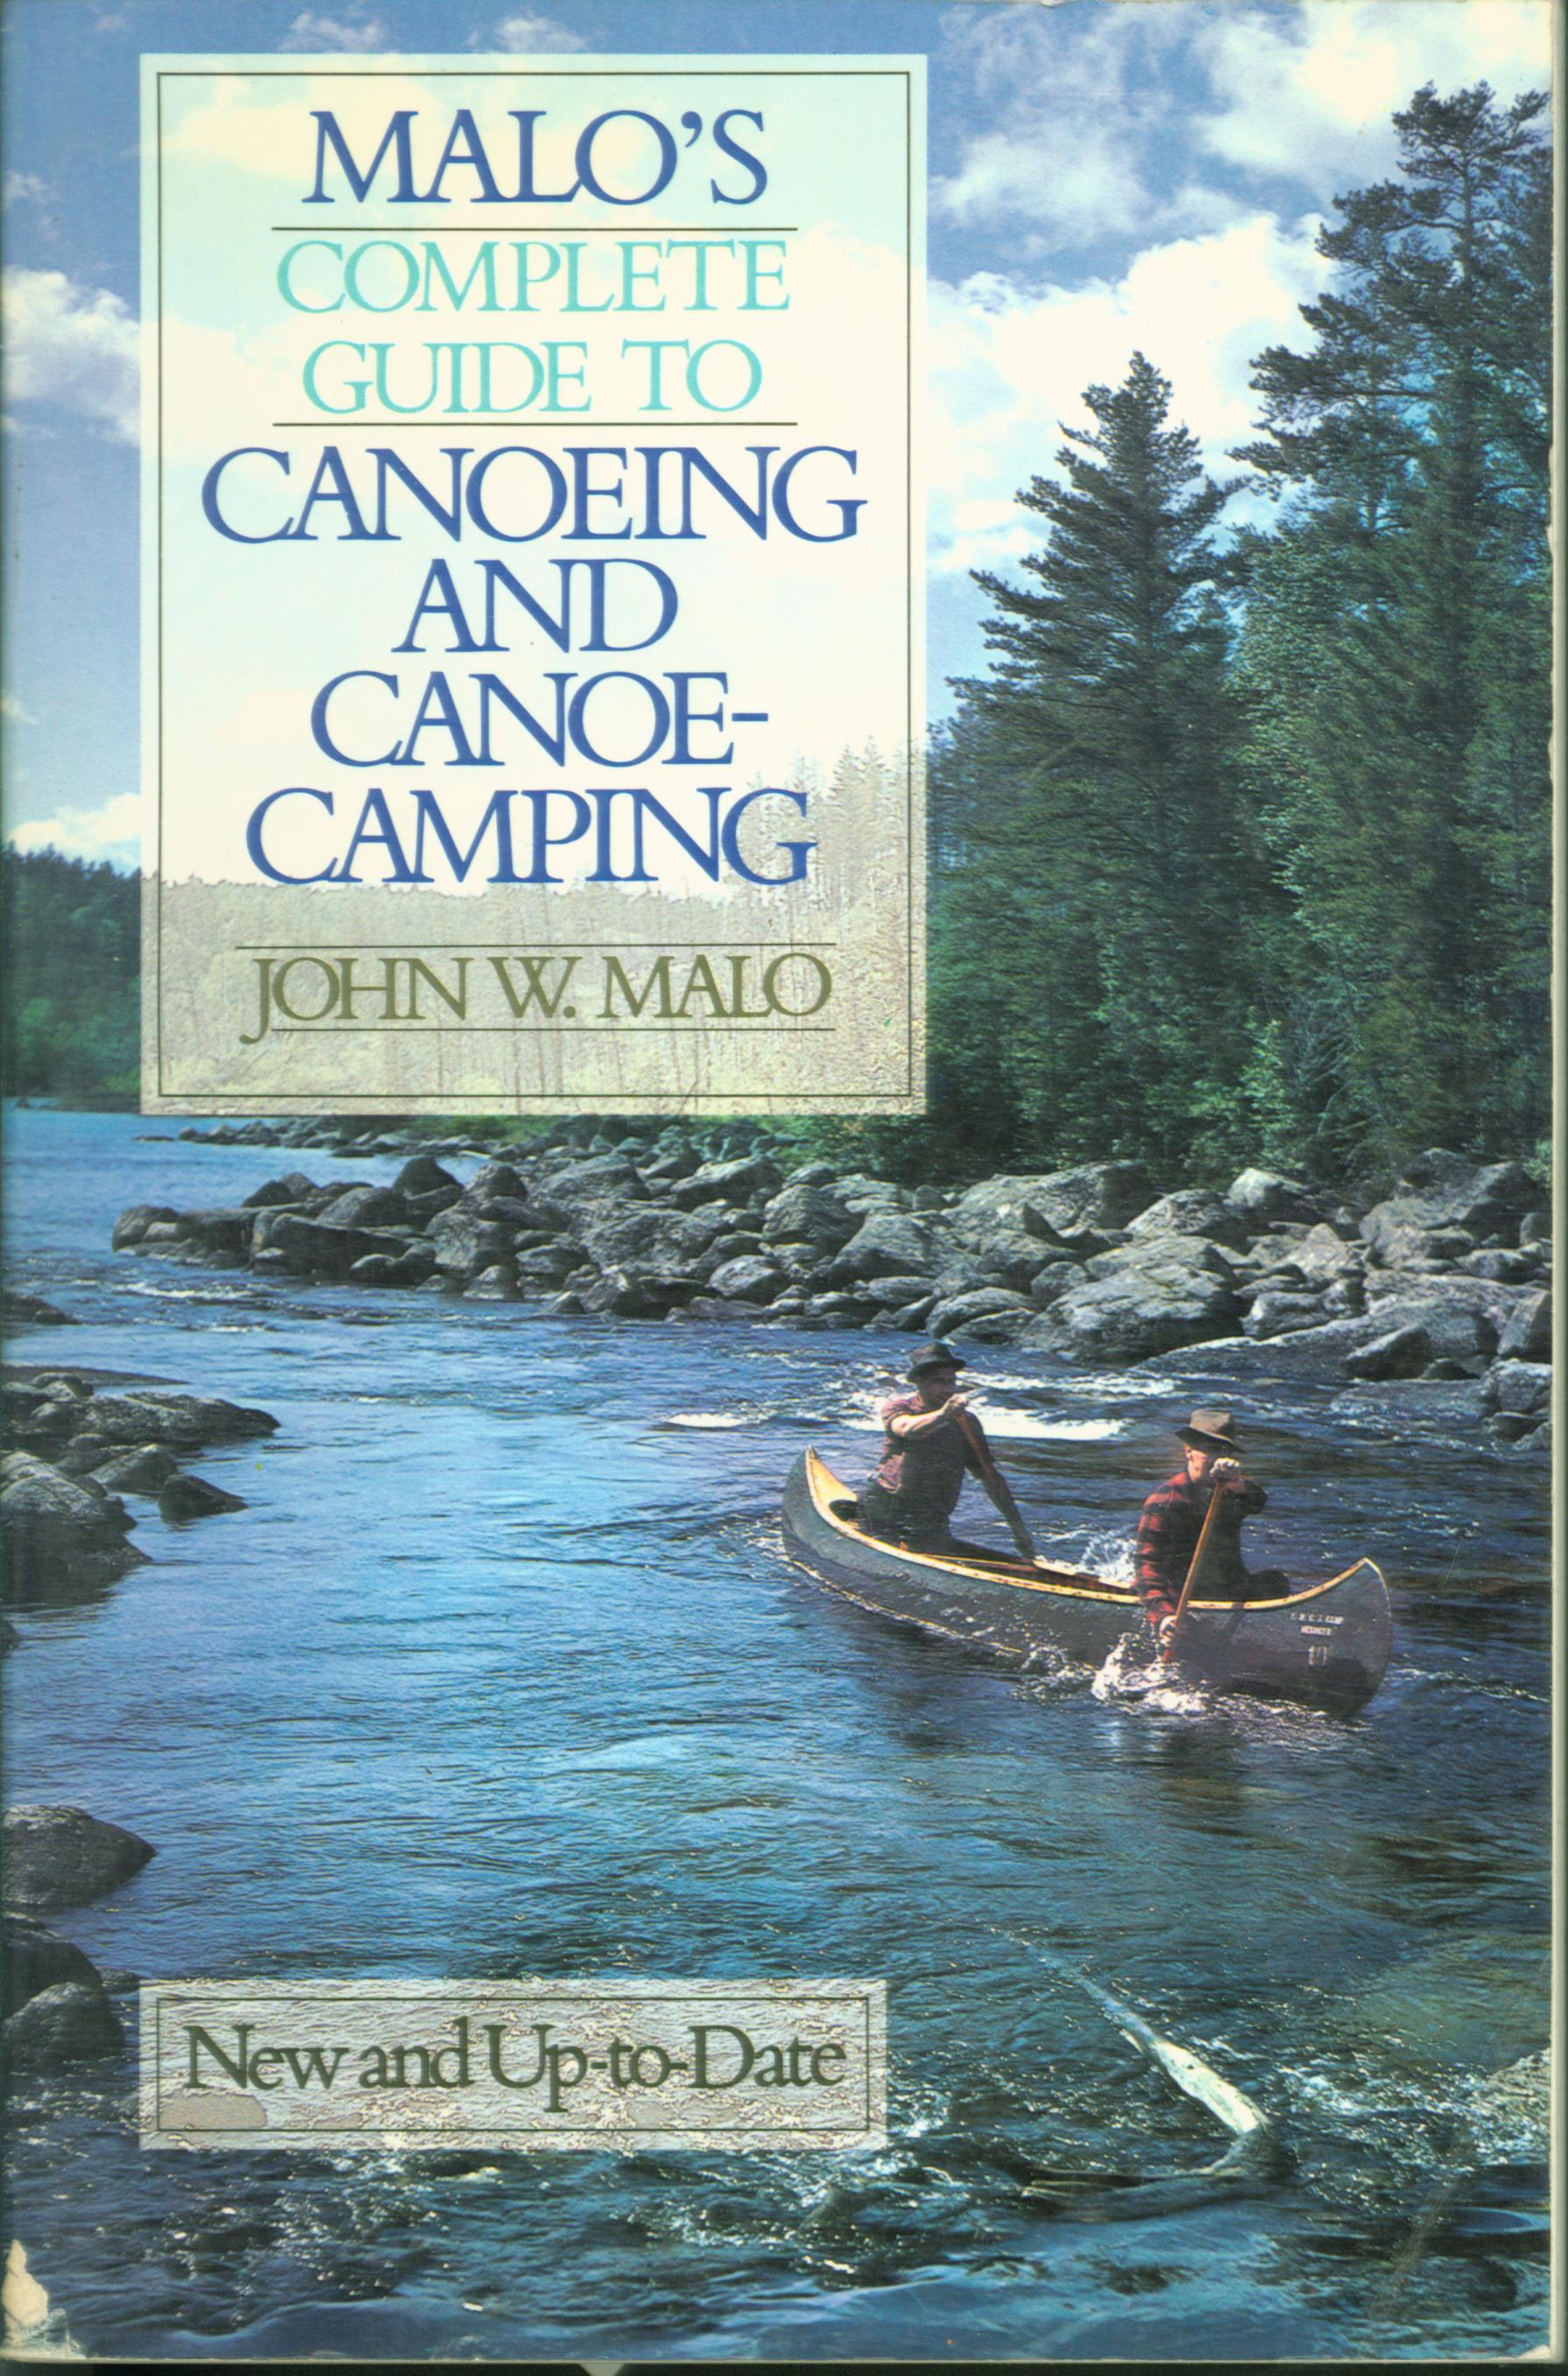 MALO'S COMPLETE GUIDE TO CANOEING AND CANOE-CAMPING. 